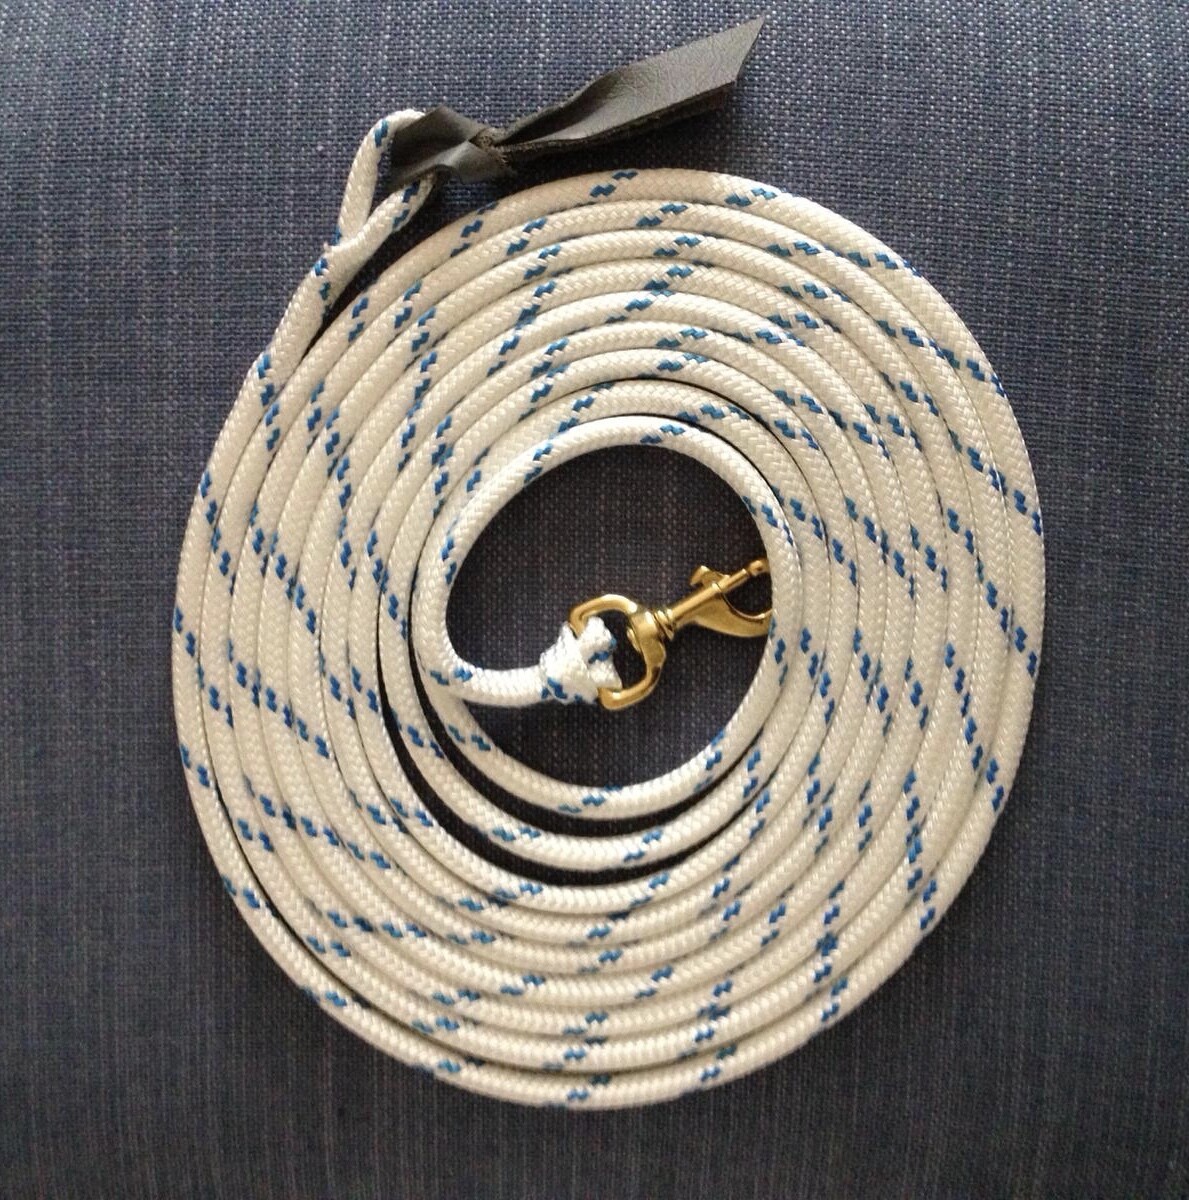 24ft (approx) Training Rope. Price includes UK shipping costs. Please contact for international shipping .